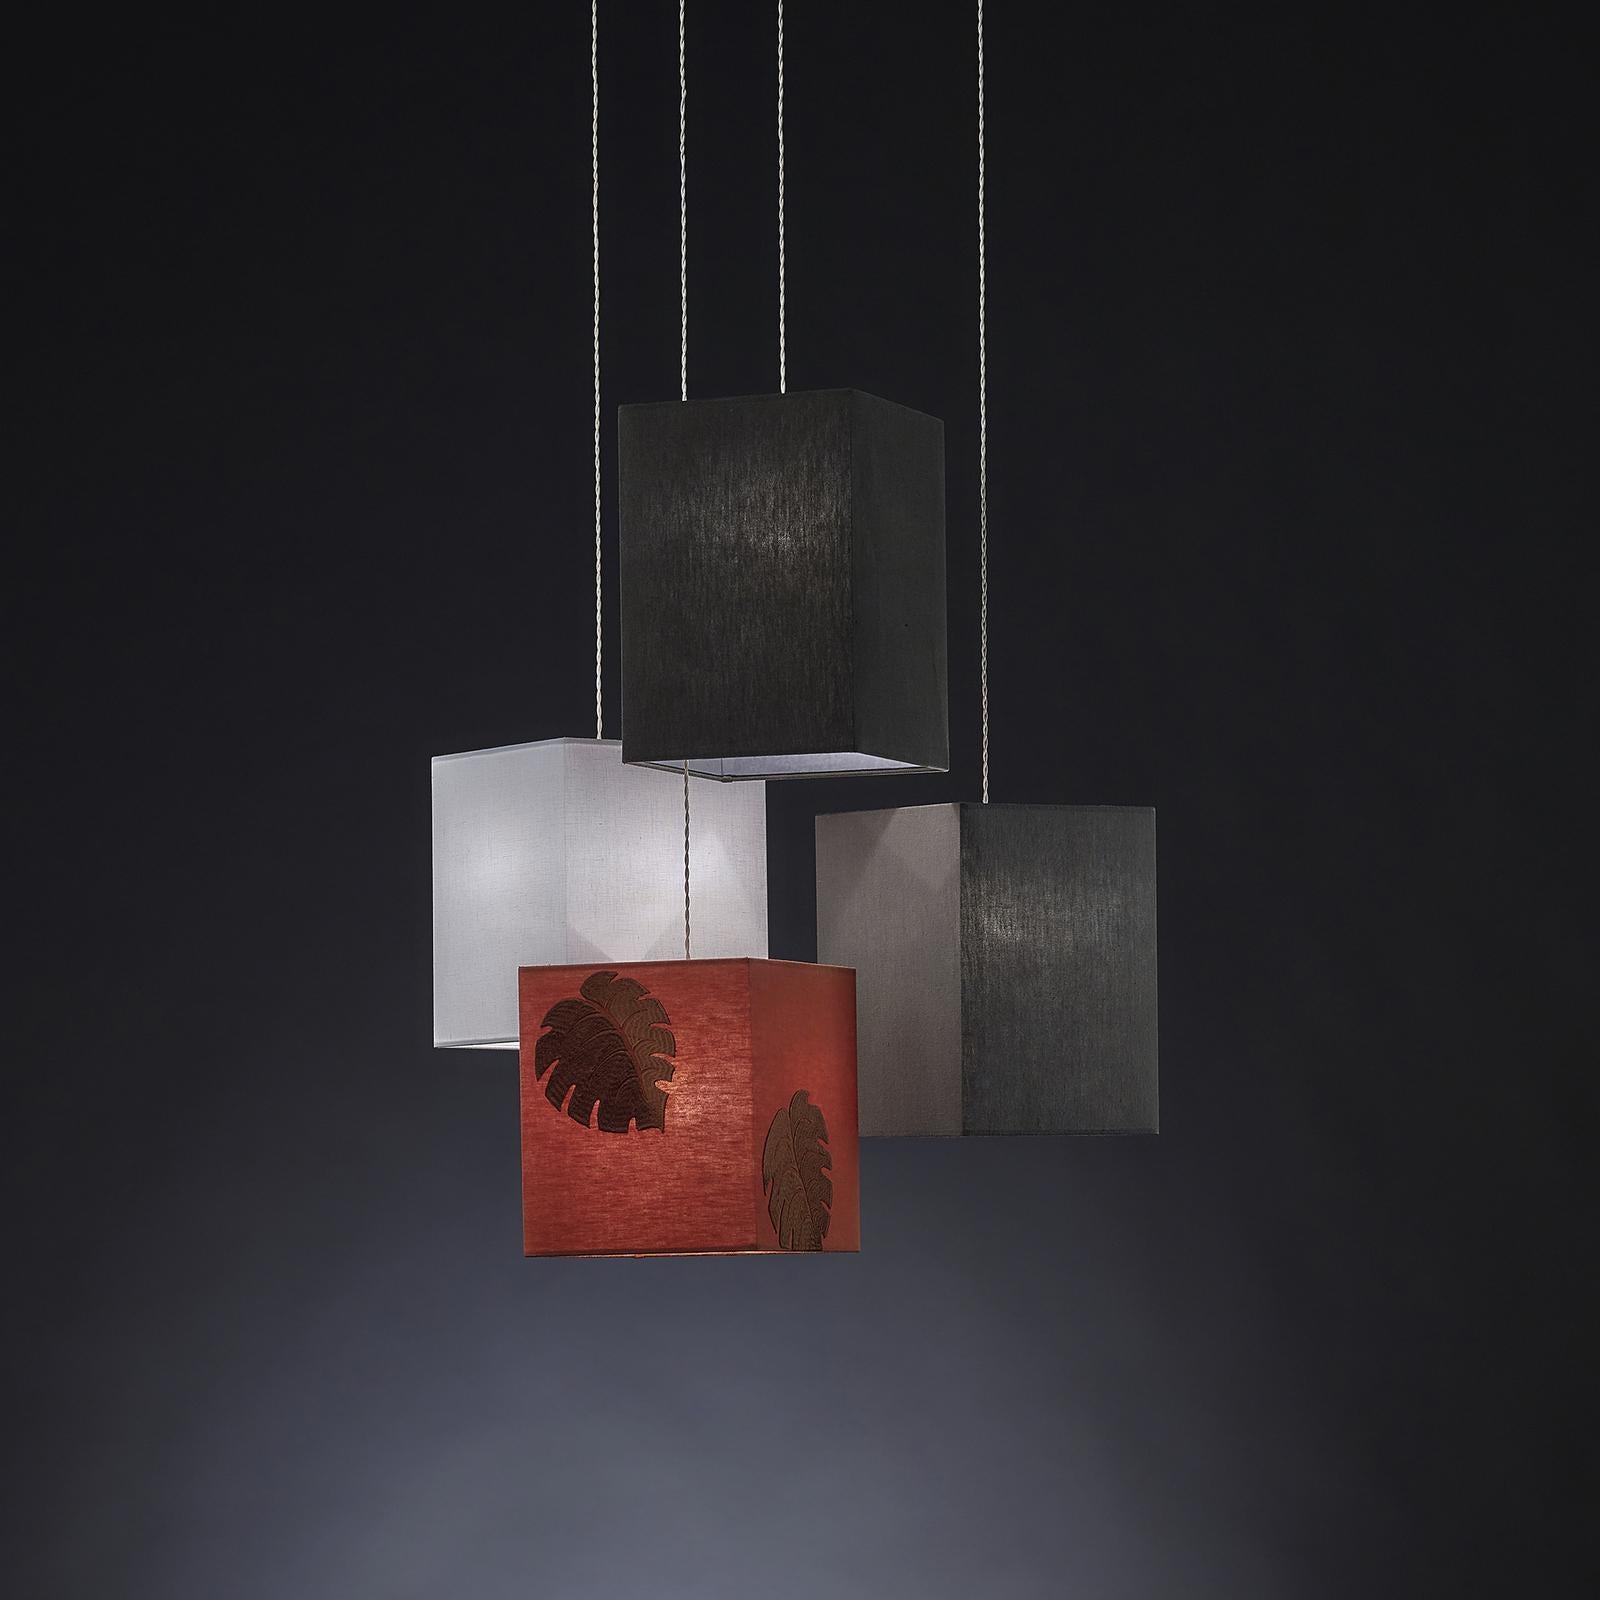 A captivating use of chiaroscuro with a contemporary touch, this exceptional arrangement of bespoke pendant lamps will heighten the drama of any Minimalist loft decor. The square lampshades are handcrafted of stonewashed linen and measure (in cm.):